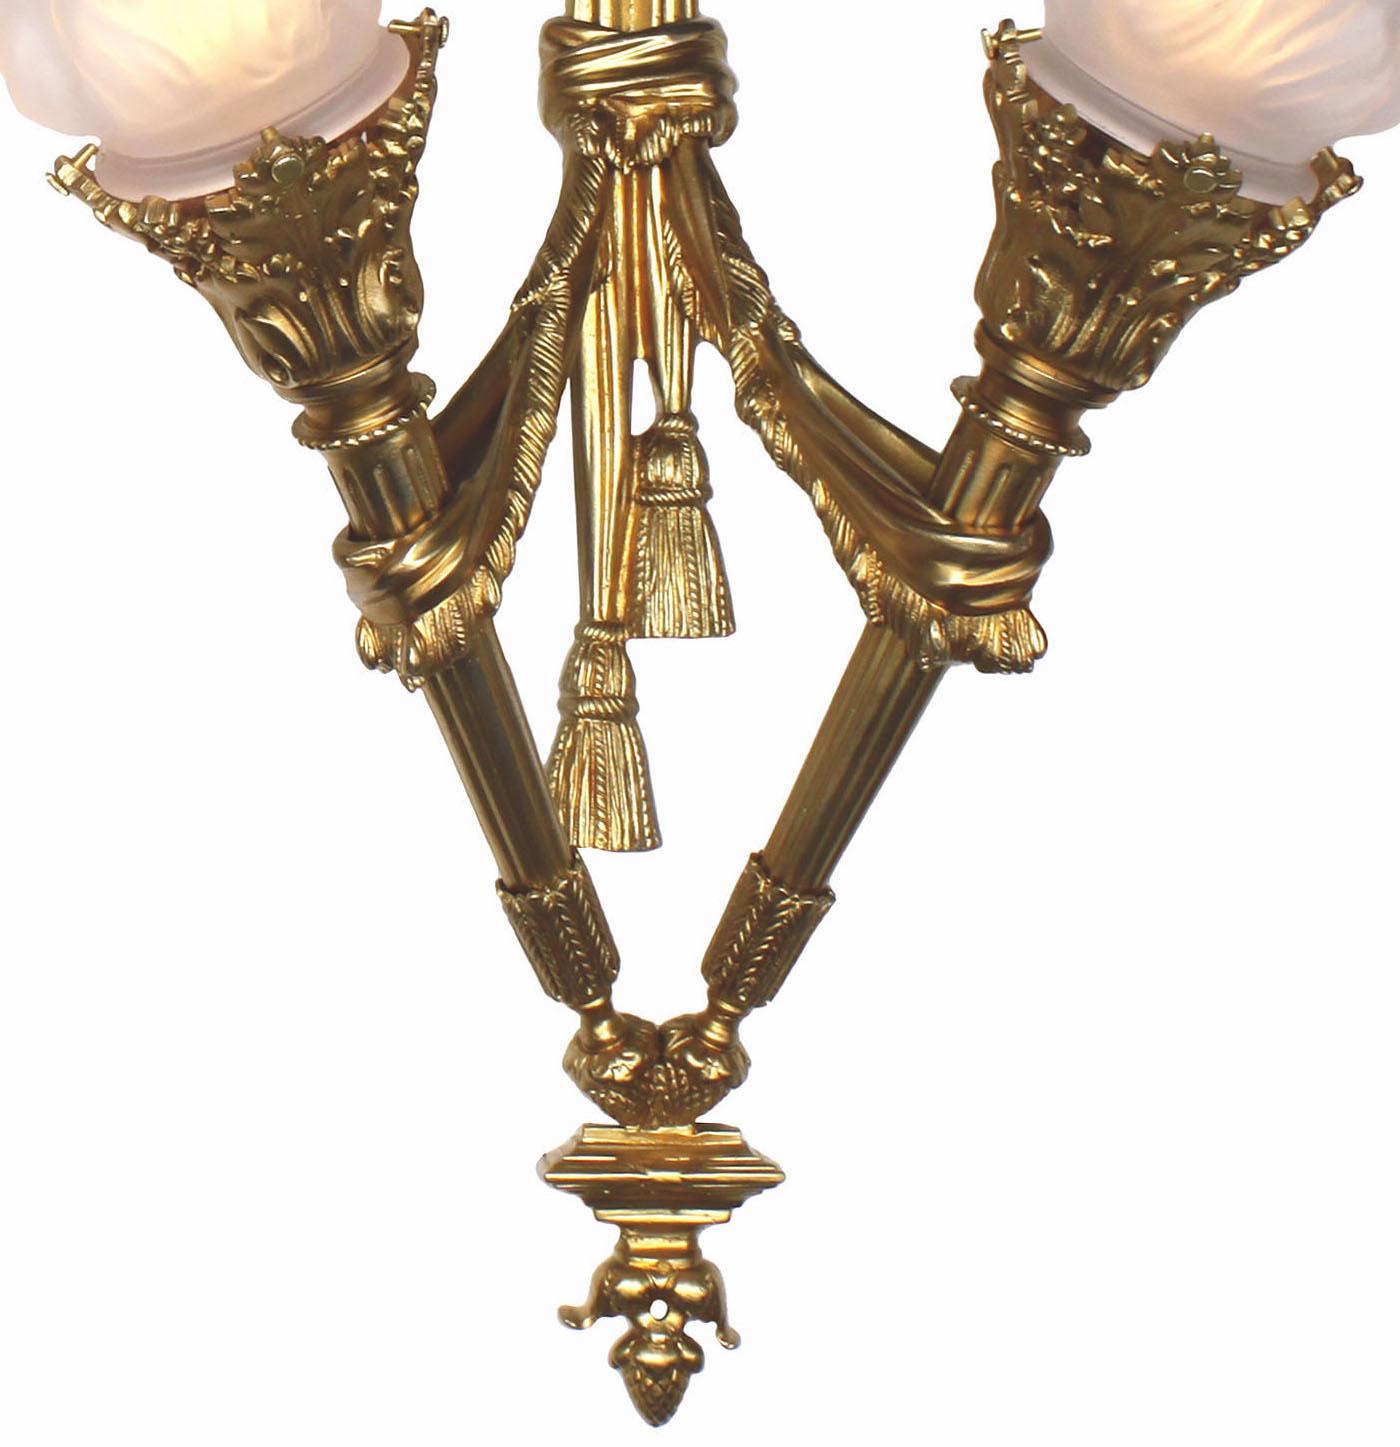 Pair of French Empire Style Gilt-Bronze Two-Light Wall Torchère Sconces For Sale 2